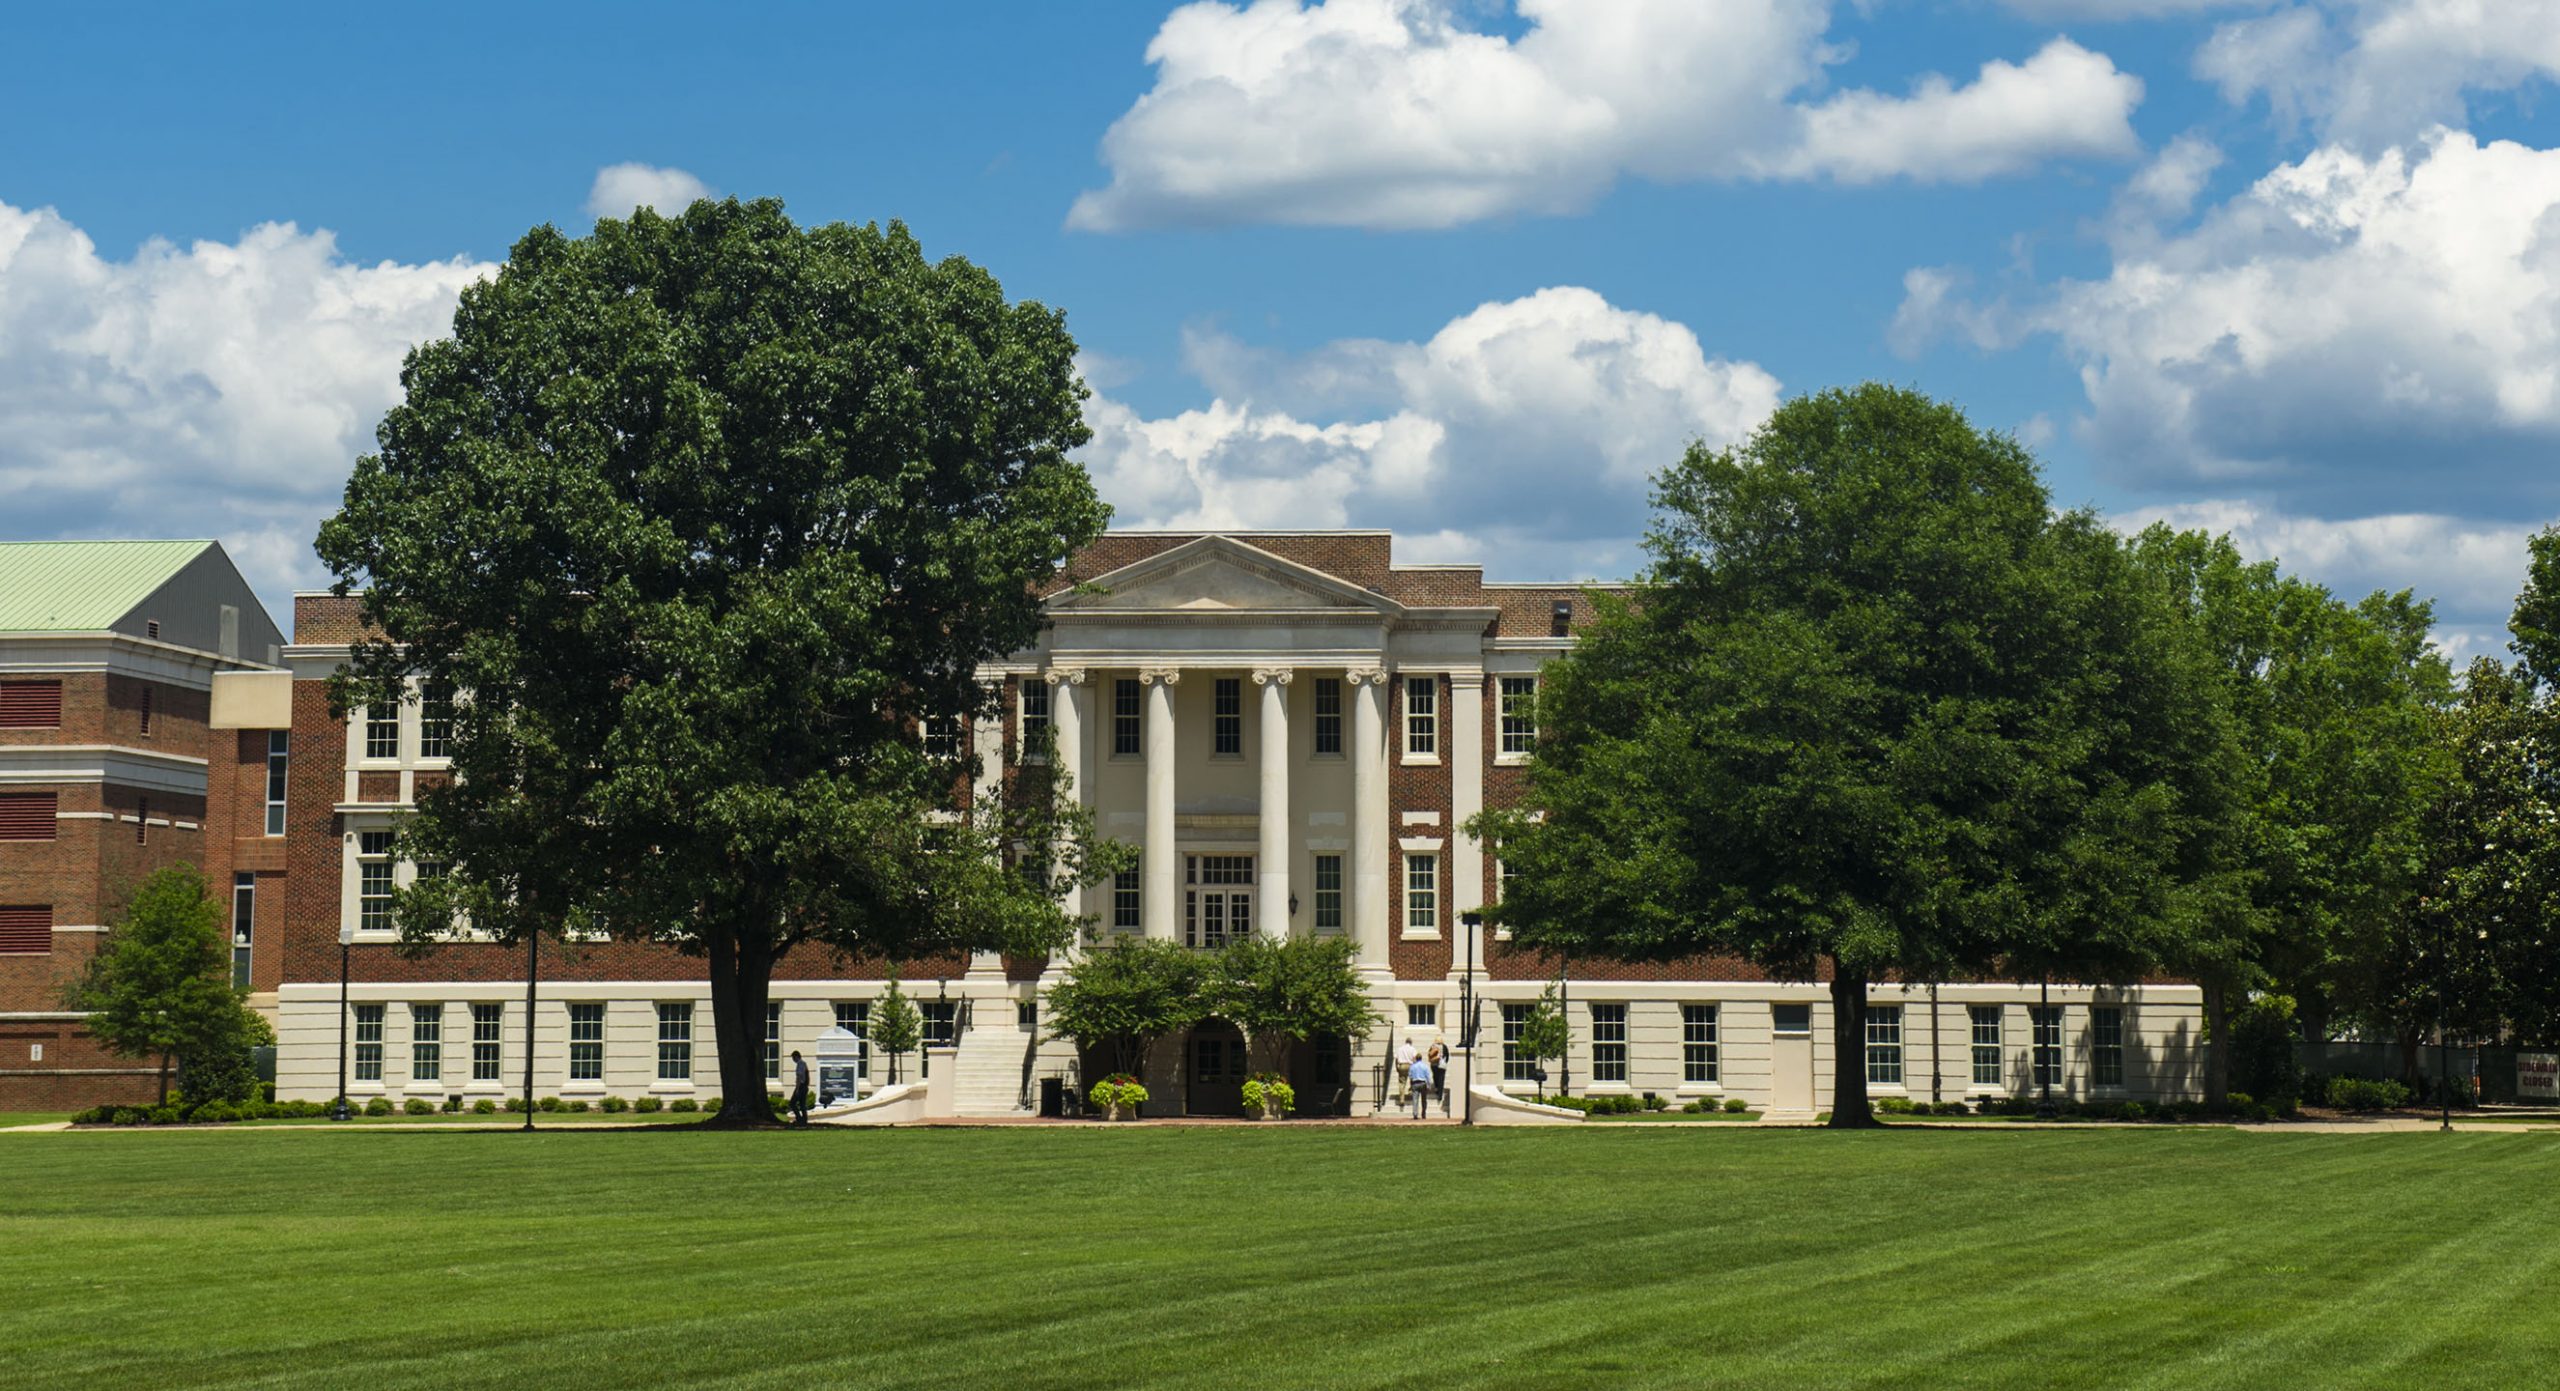 The Honors College building.